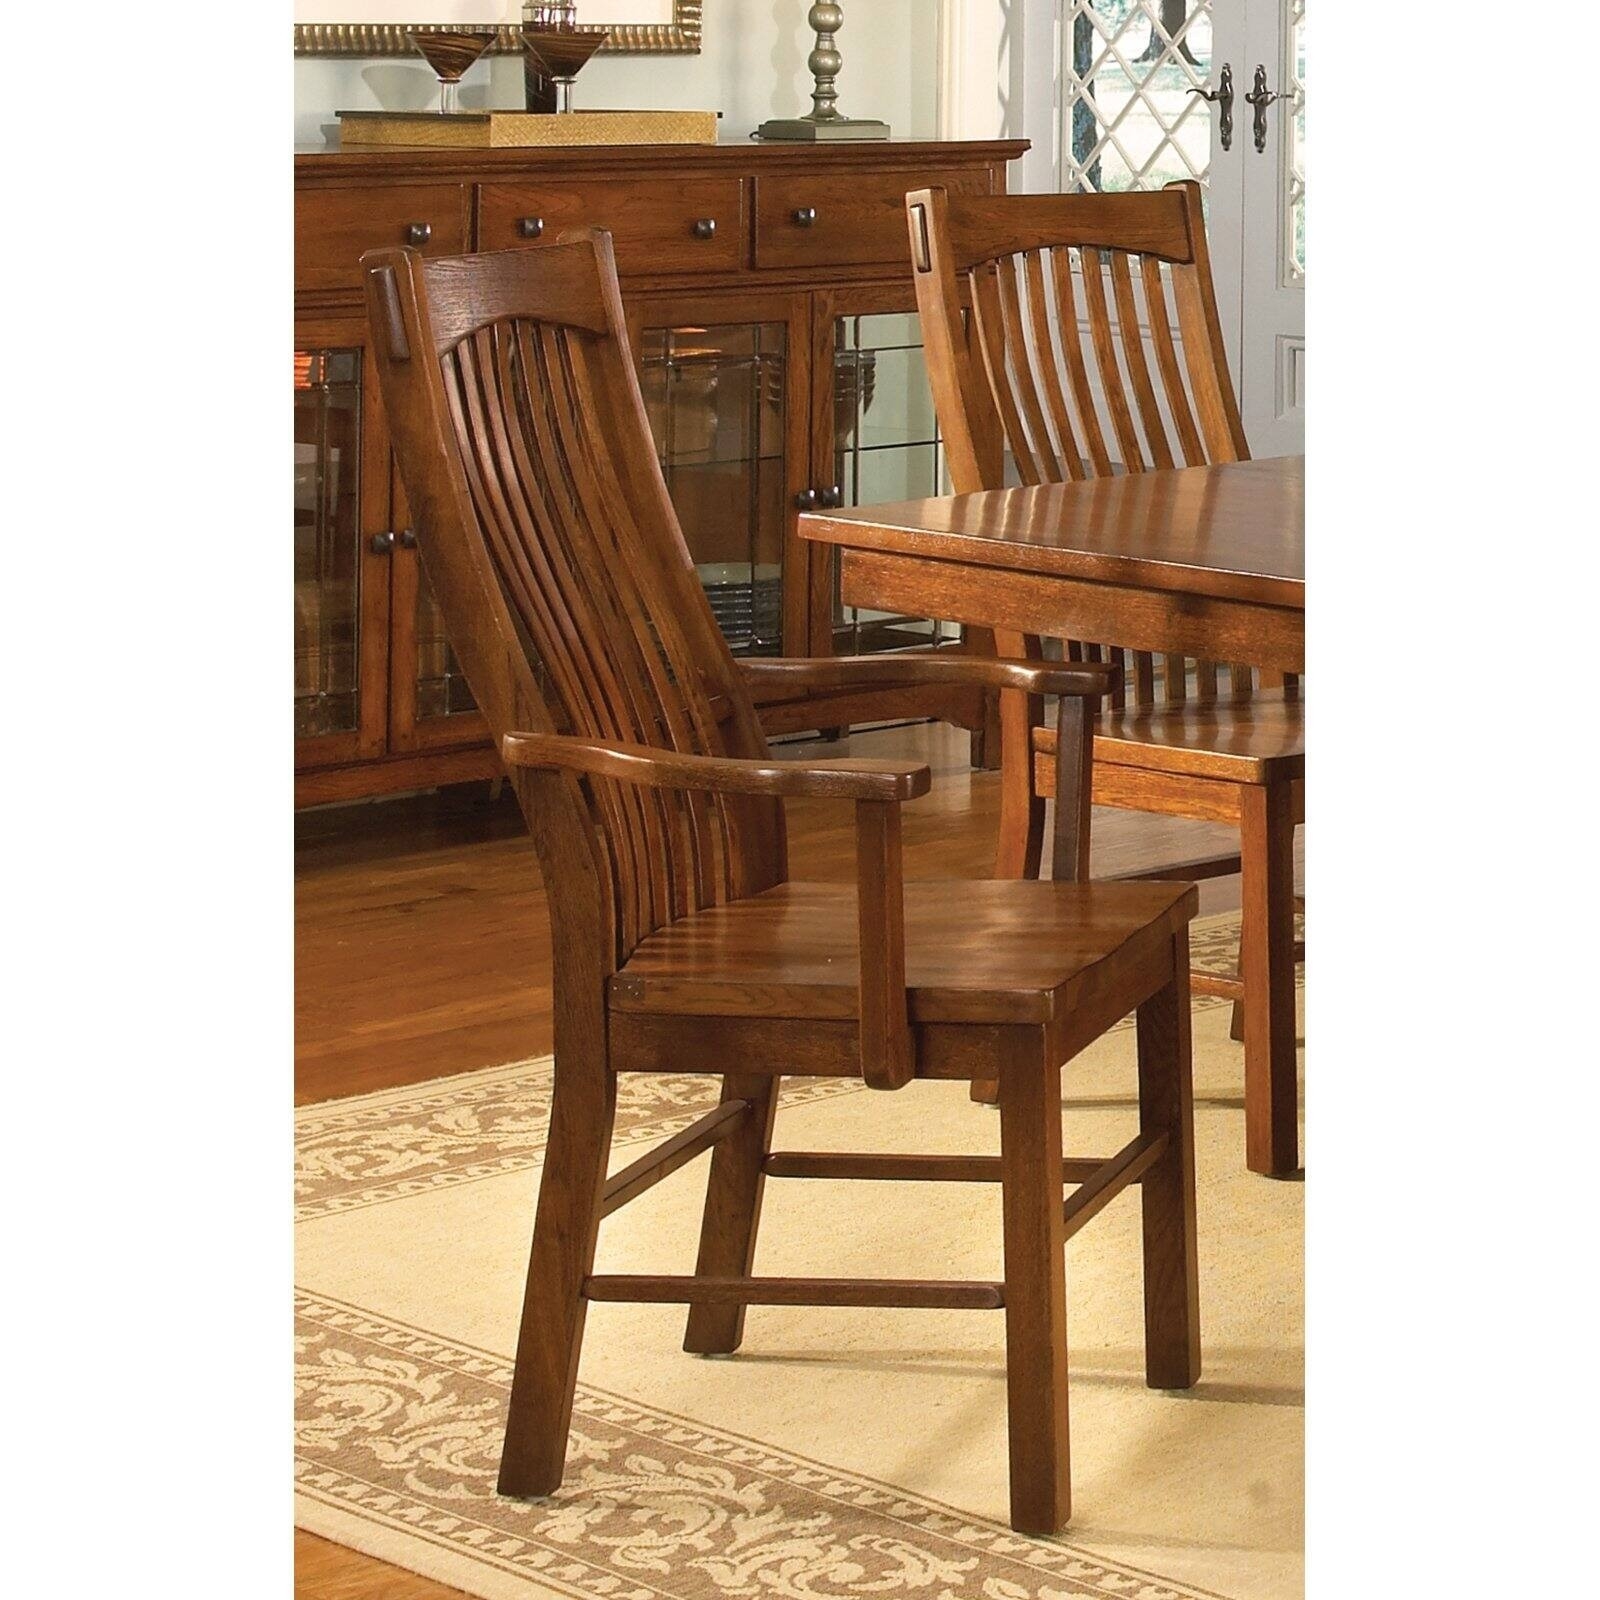 Wooden Kitchen Chairs With Arms Ideas On Foter